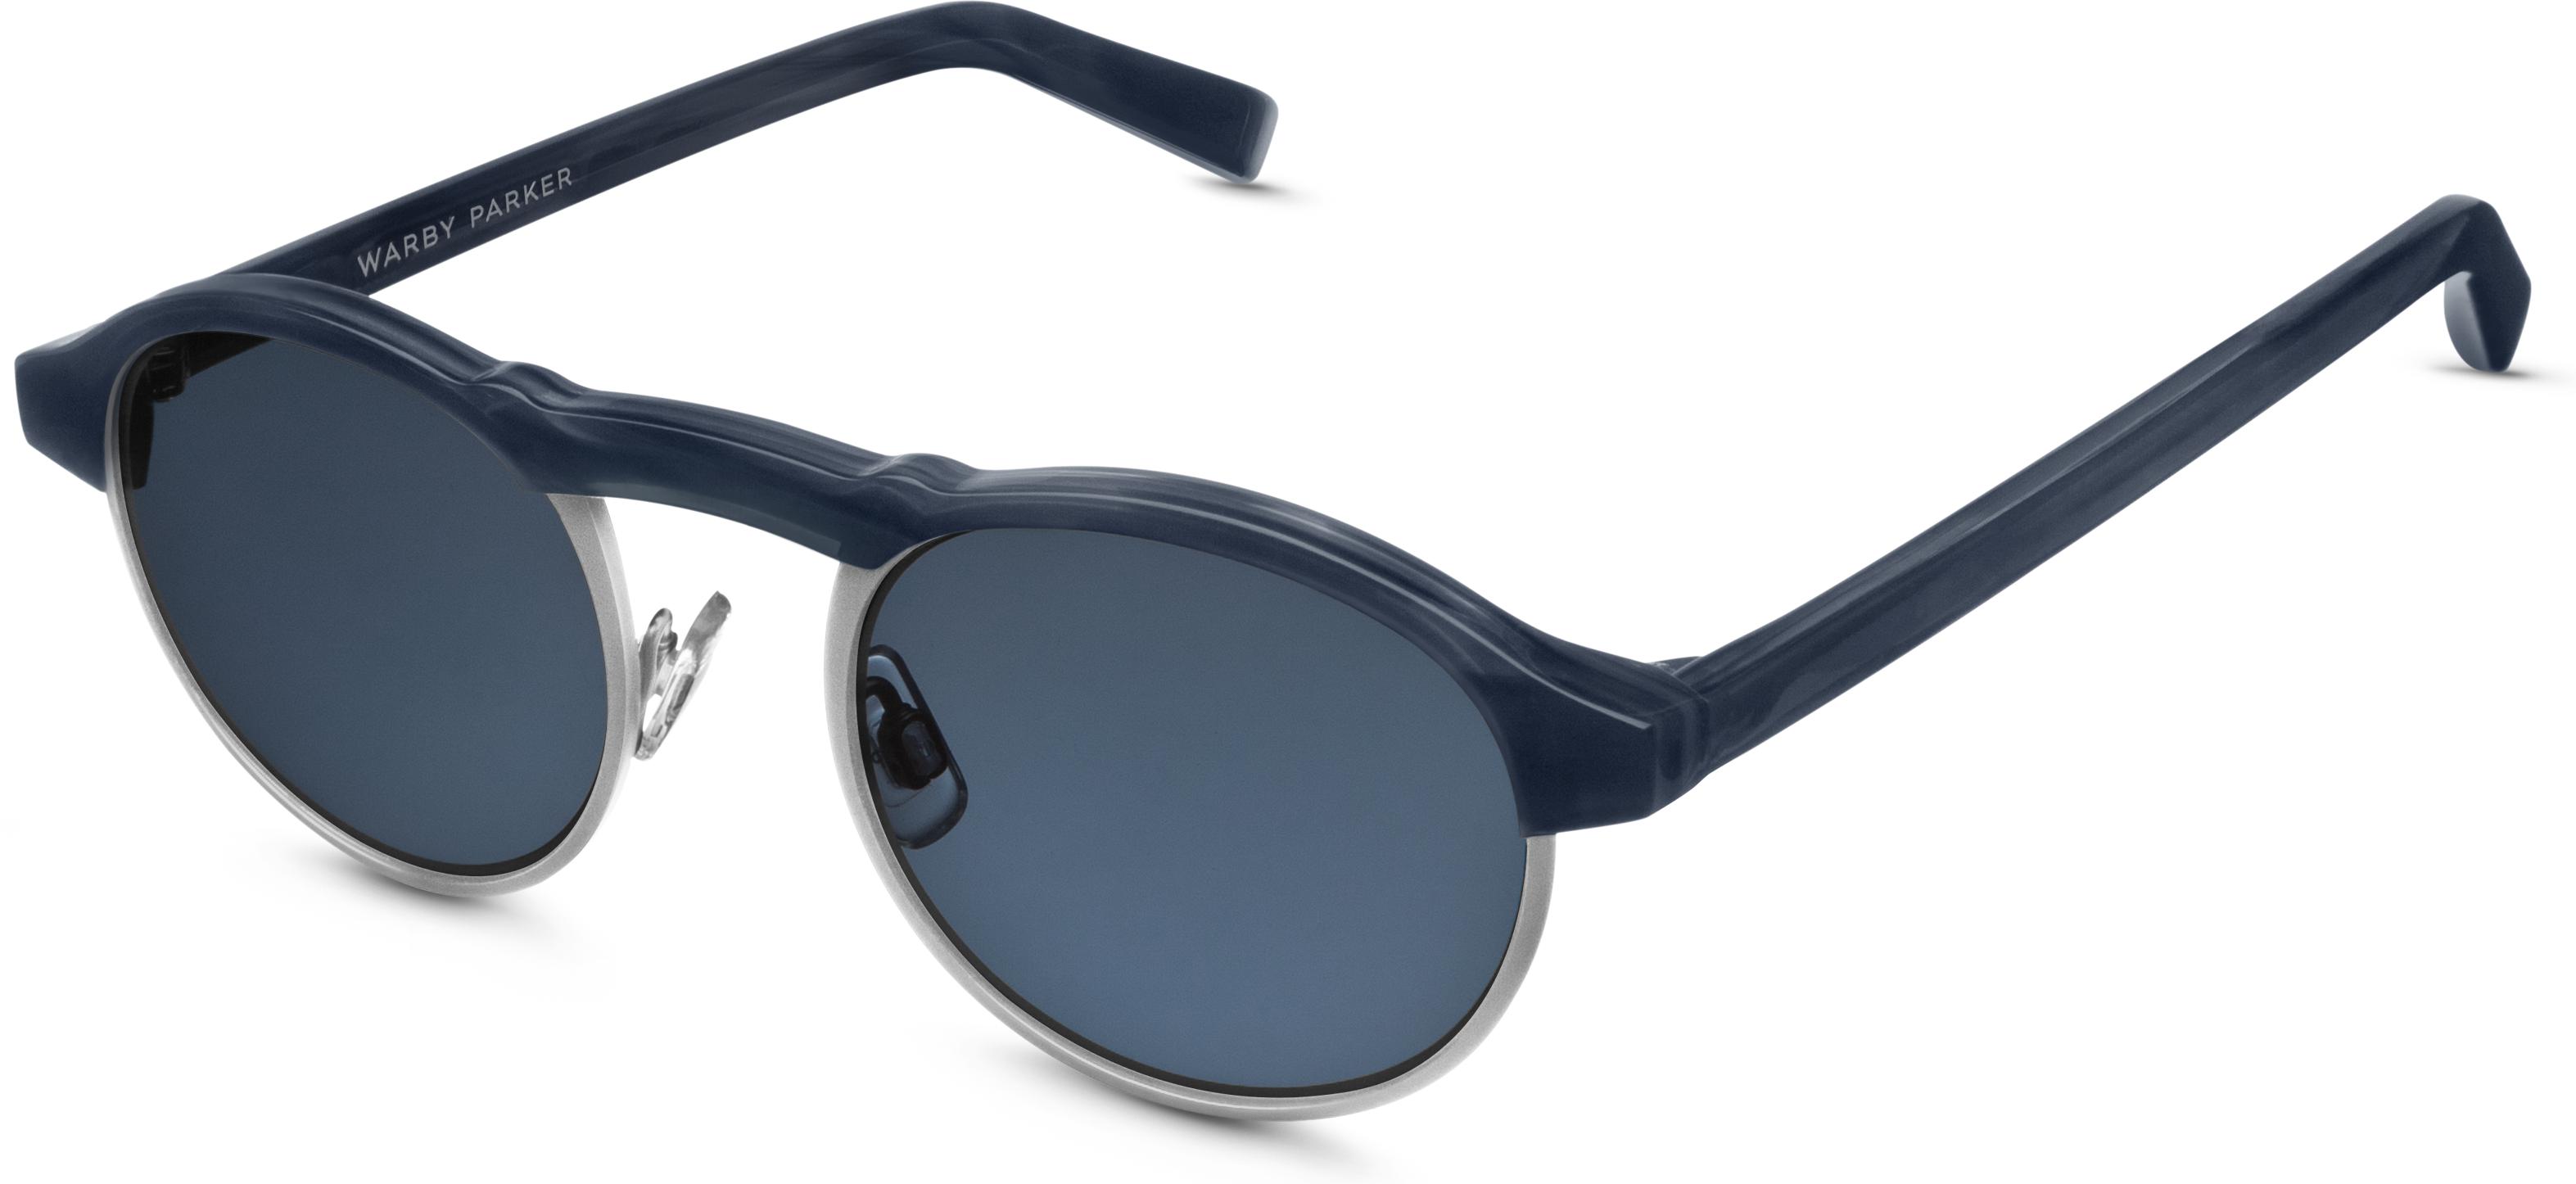 Bates Sunglasses in Striped Pacific | Warby Parker